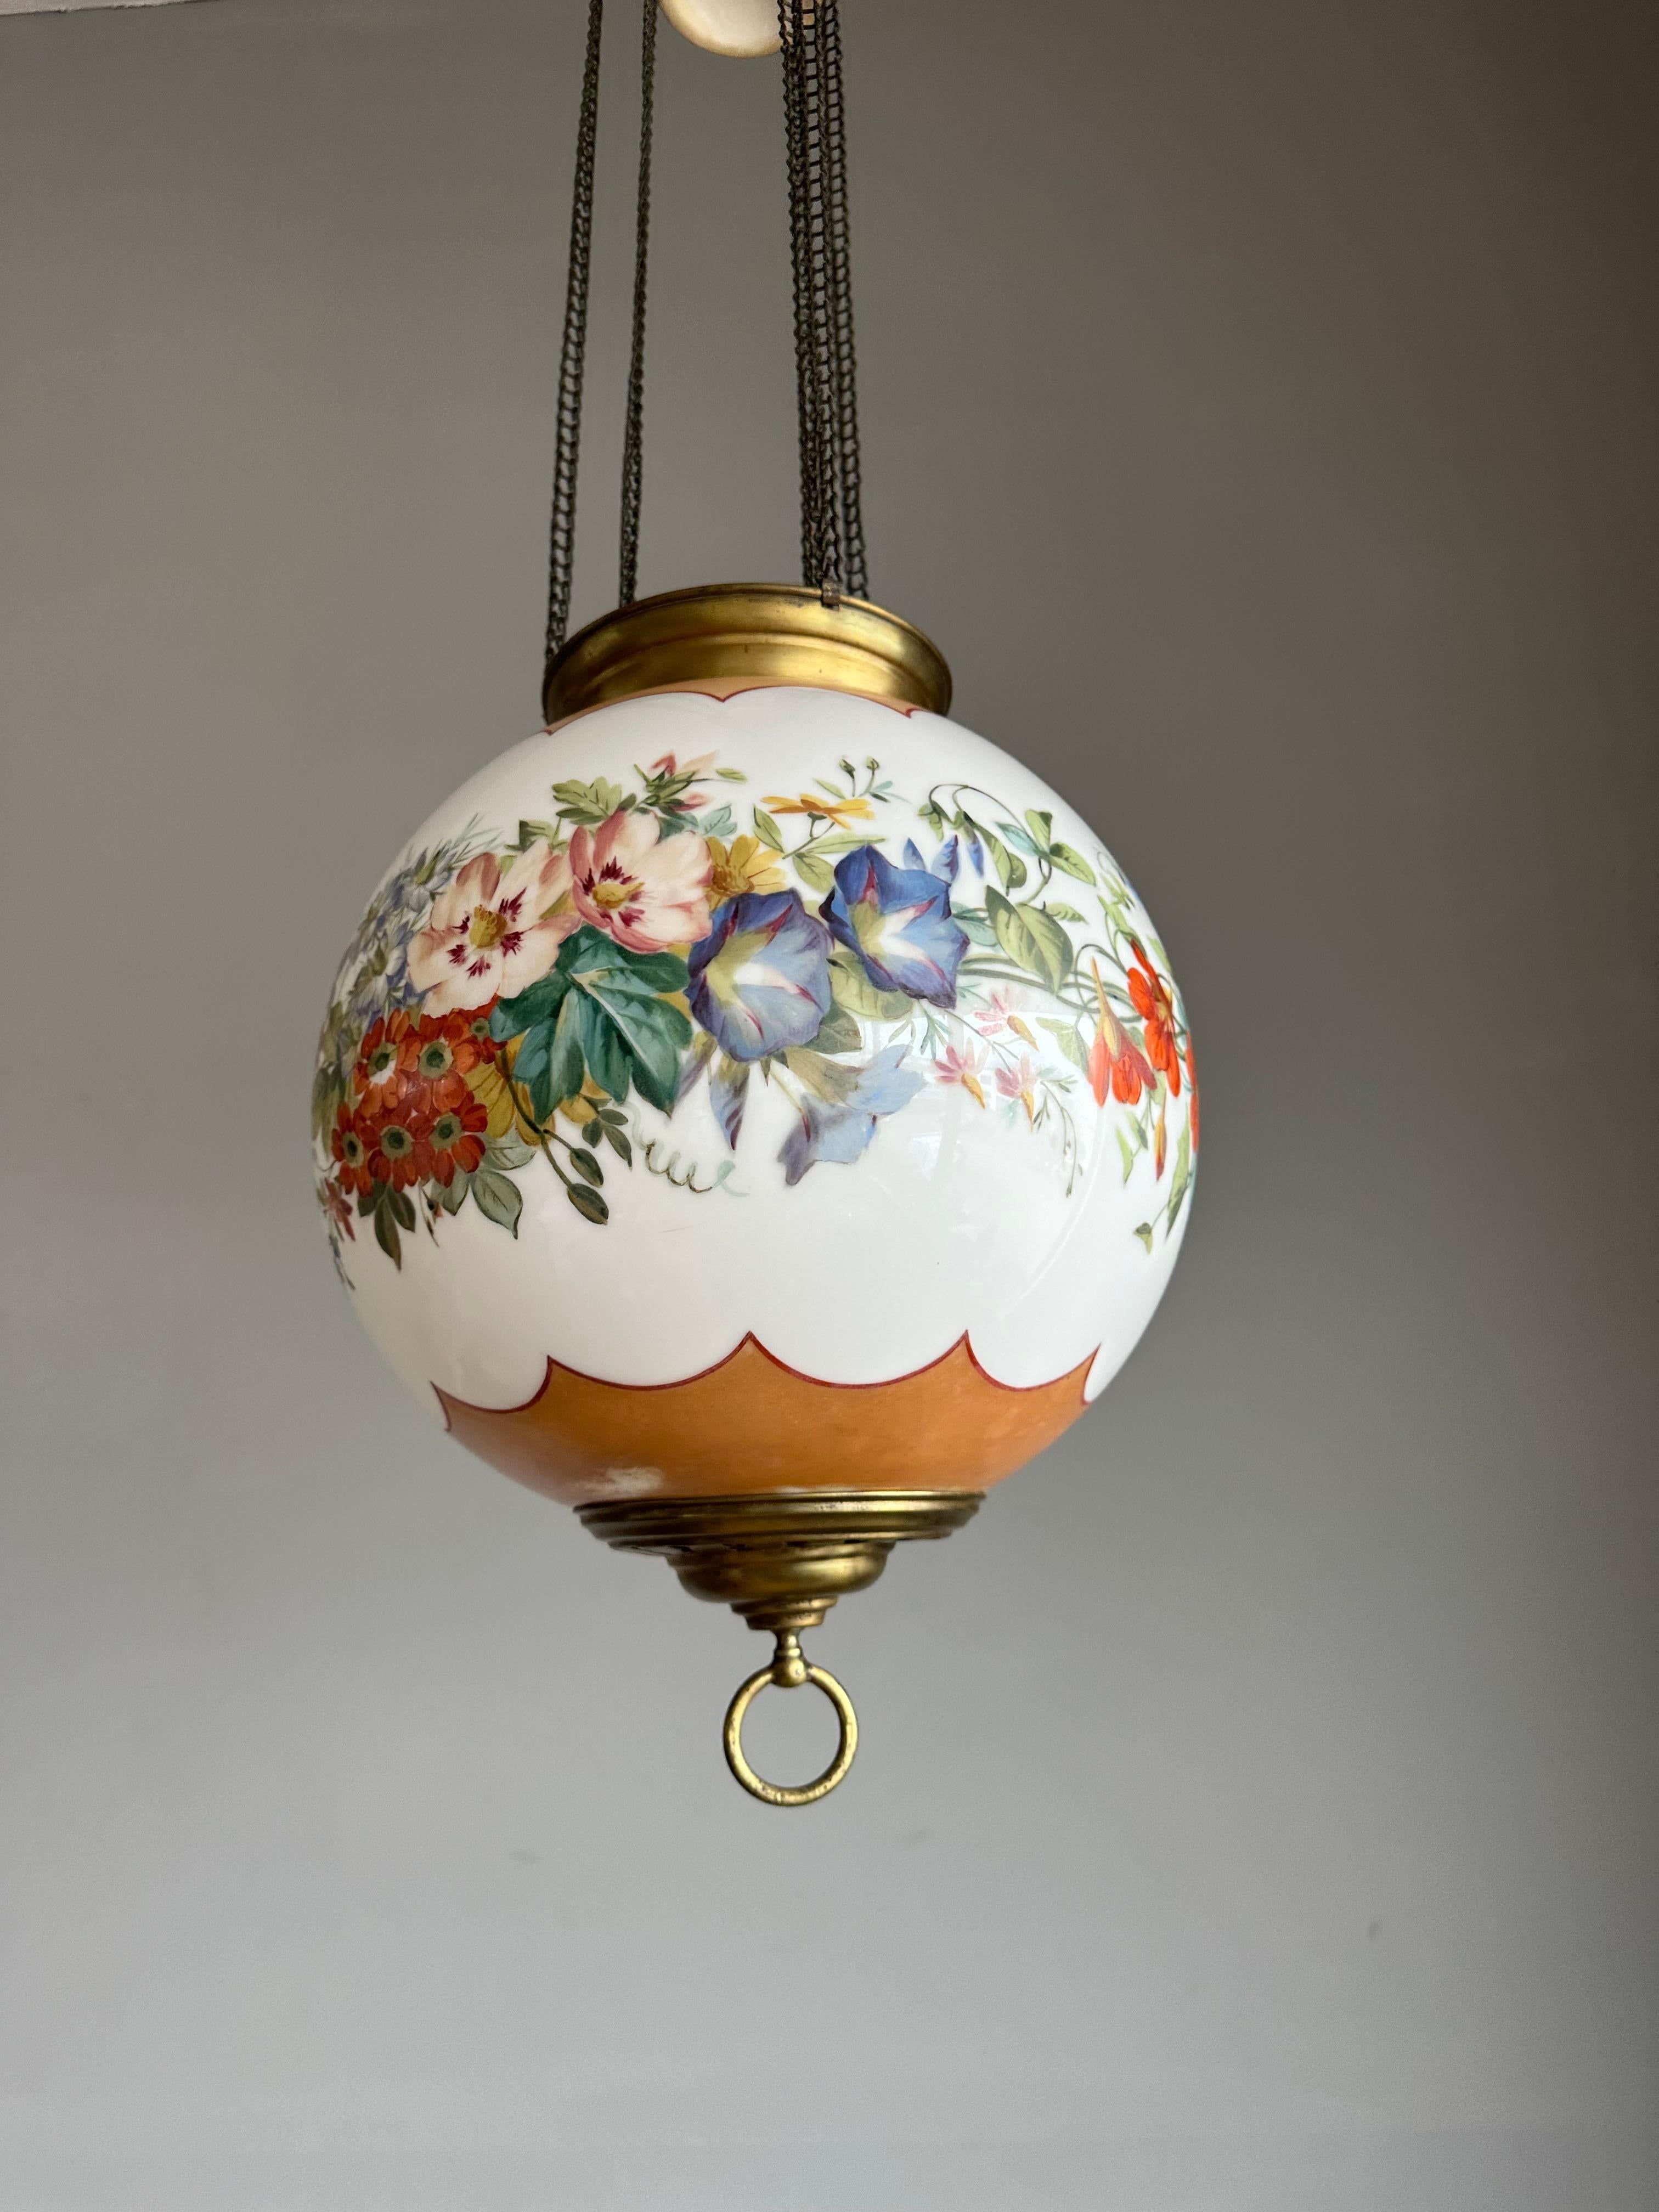 Wonderful design, antique pendant Light with brass gallery with colorful wreath of flowers decor, late Victorian 1900s.

If you are looking for a rare, beautifully designed and finely decorated pendant to grace your entrance, landing or perhaps your